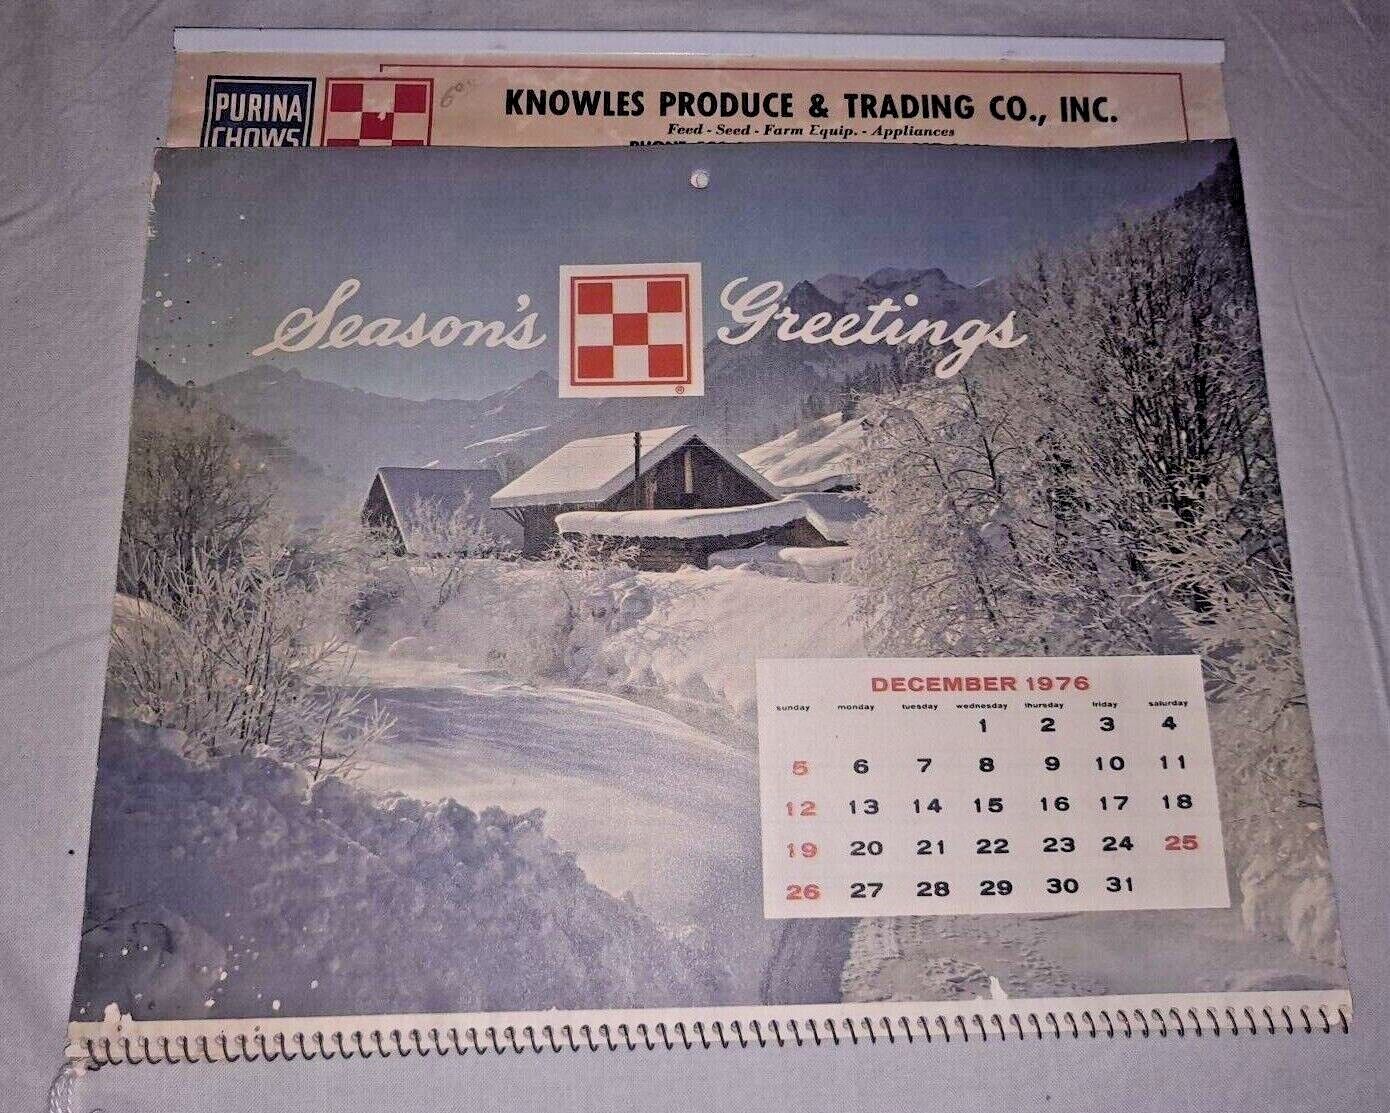 1977 Advertising Calendar Purina Chows, Knowles Produce Tradin...